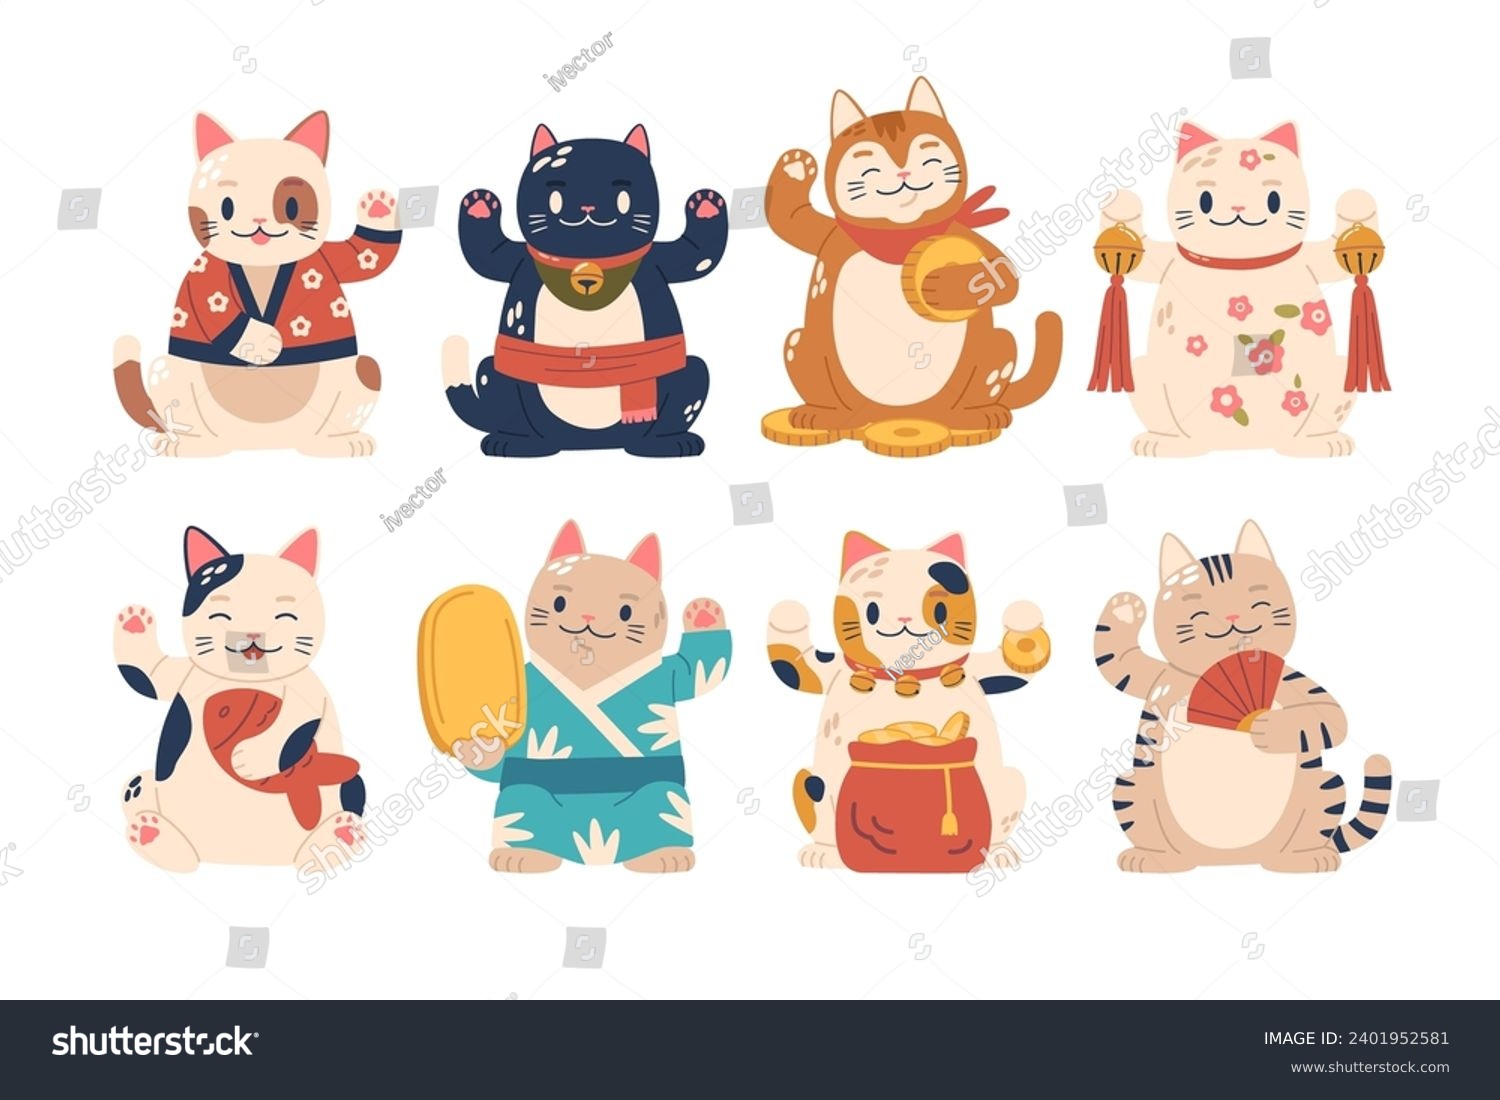 SVG of Maneki Neko Japanese Lucky Cats, Flaunts Raised Paws, Beckoning Fortune. Adorned With Vibrant Colors And Smiling Face svg